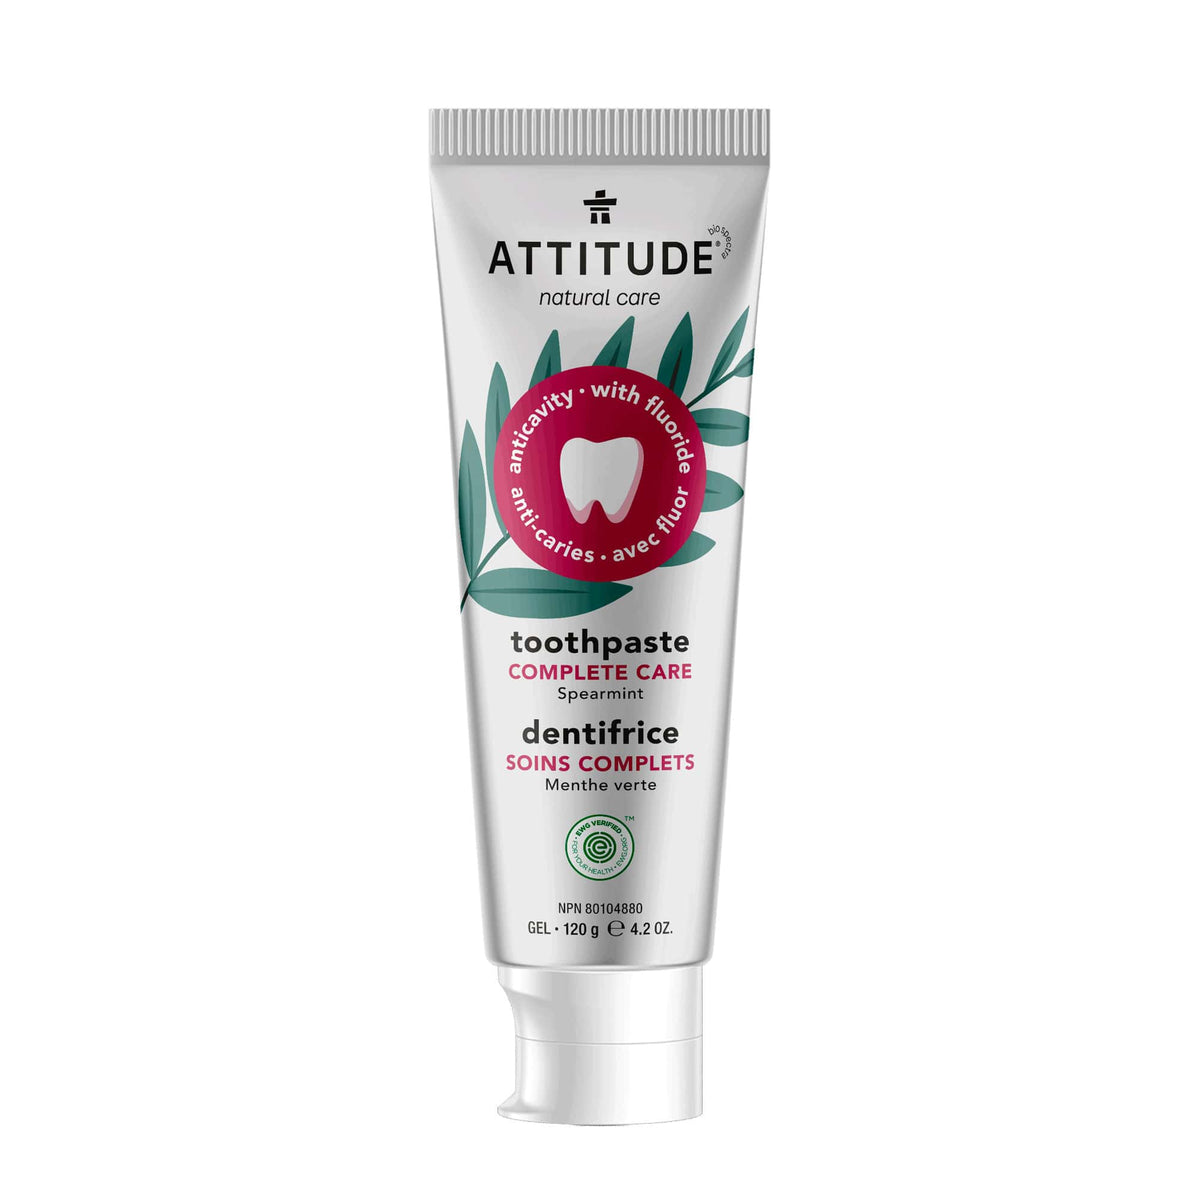 Toothpaste Complete Care with Fluoride - 120g - ProCare Outlet by ATTITUDE